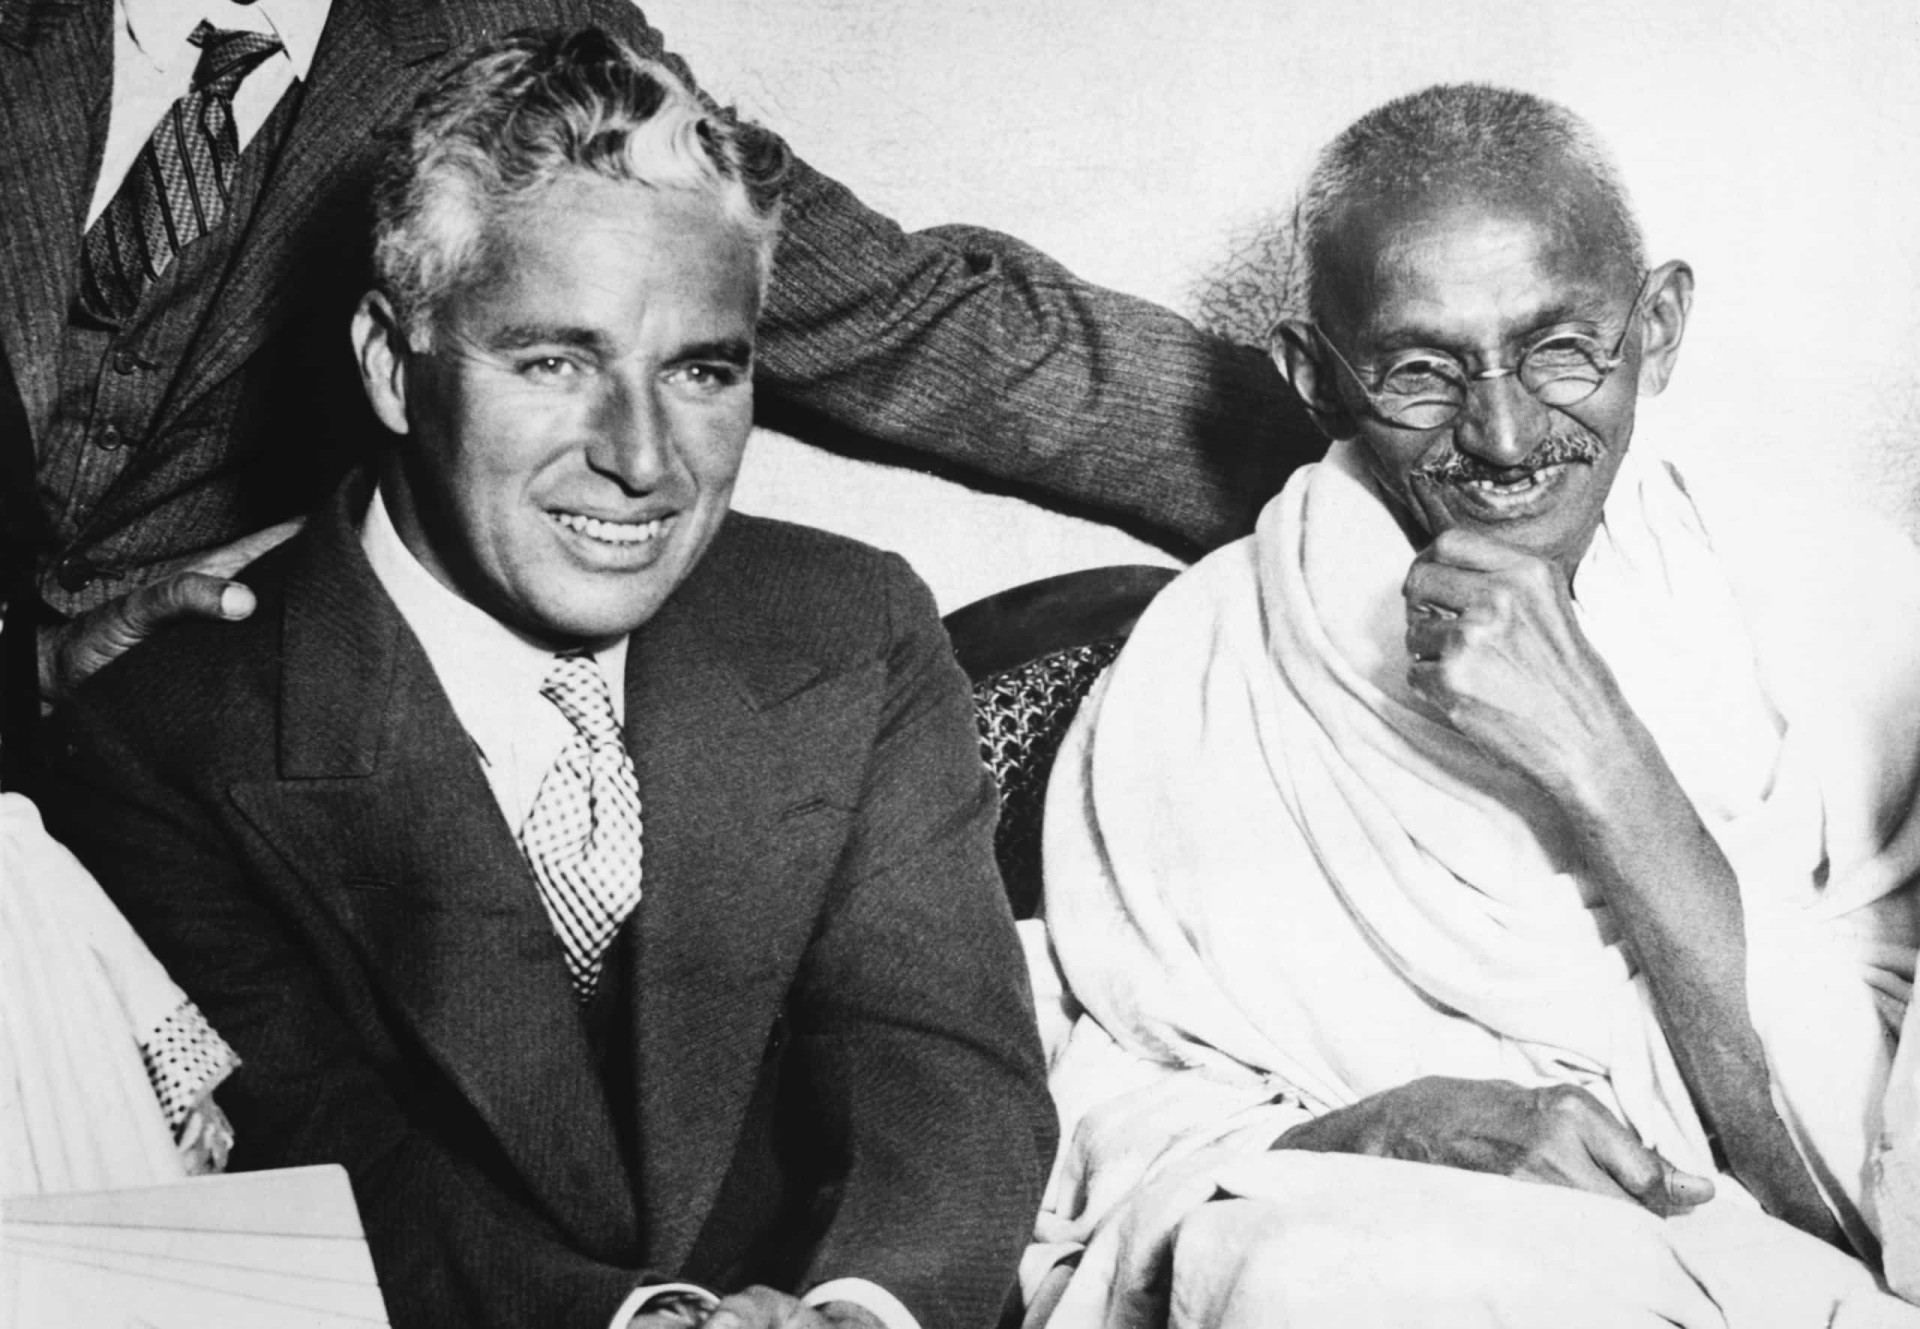 <p>Gandhi took time out to meet <a href="https://www.starsinsider.com/movies/352125/the-most-iconic-stars-of-the-silent-film-era" rel="noopener">Charlie Chaplin</a>, though he professed to not having previously heard of the "Little Tramp." Associates assured him of the comedian's popularity and a meeting was arranged. </p><p><a href="https://www.msn.com/en-us/community/channel/vid-7xx8mnucu55yw63we9va2gwr7uihbxwc68fxqp25x6tg4ftibpra?cvid=94631541bc0f4f89bfd59158d696ad7e">Follow us and access great exclusive content every day</a></p>